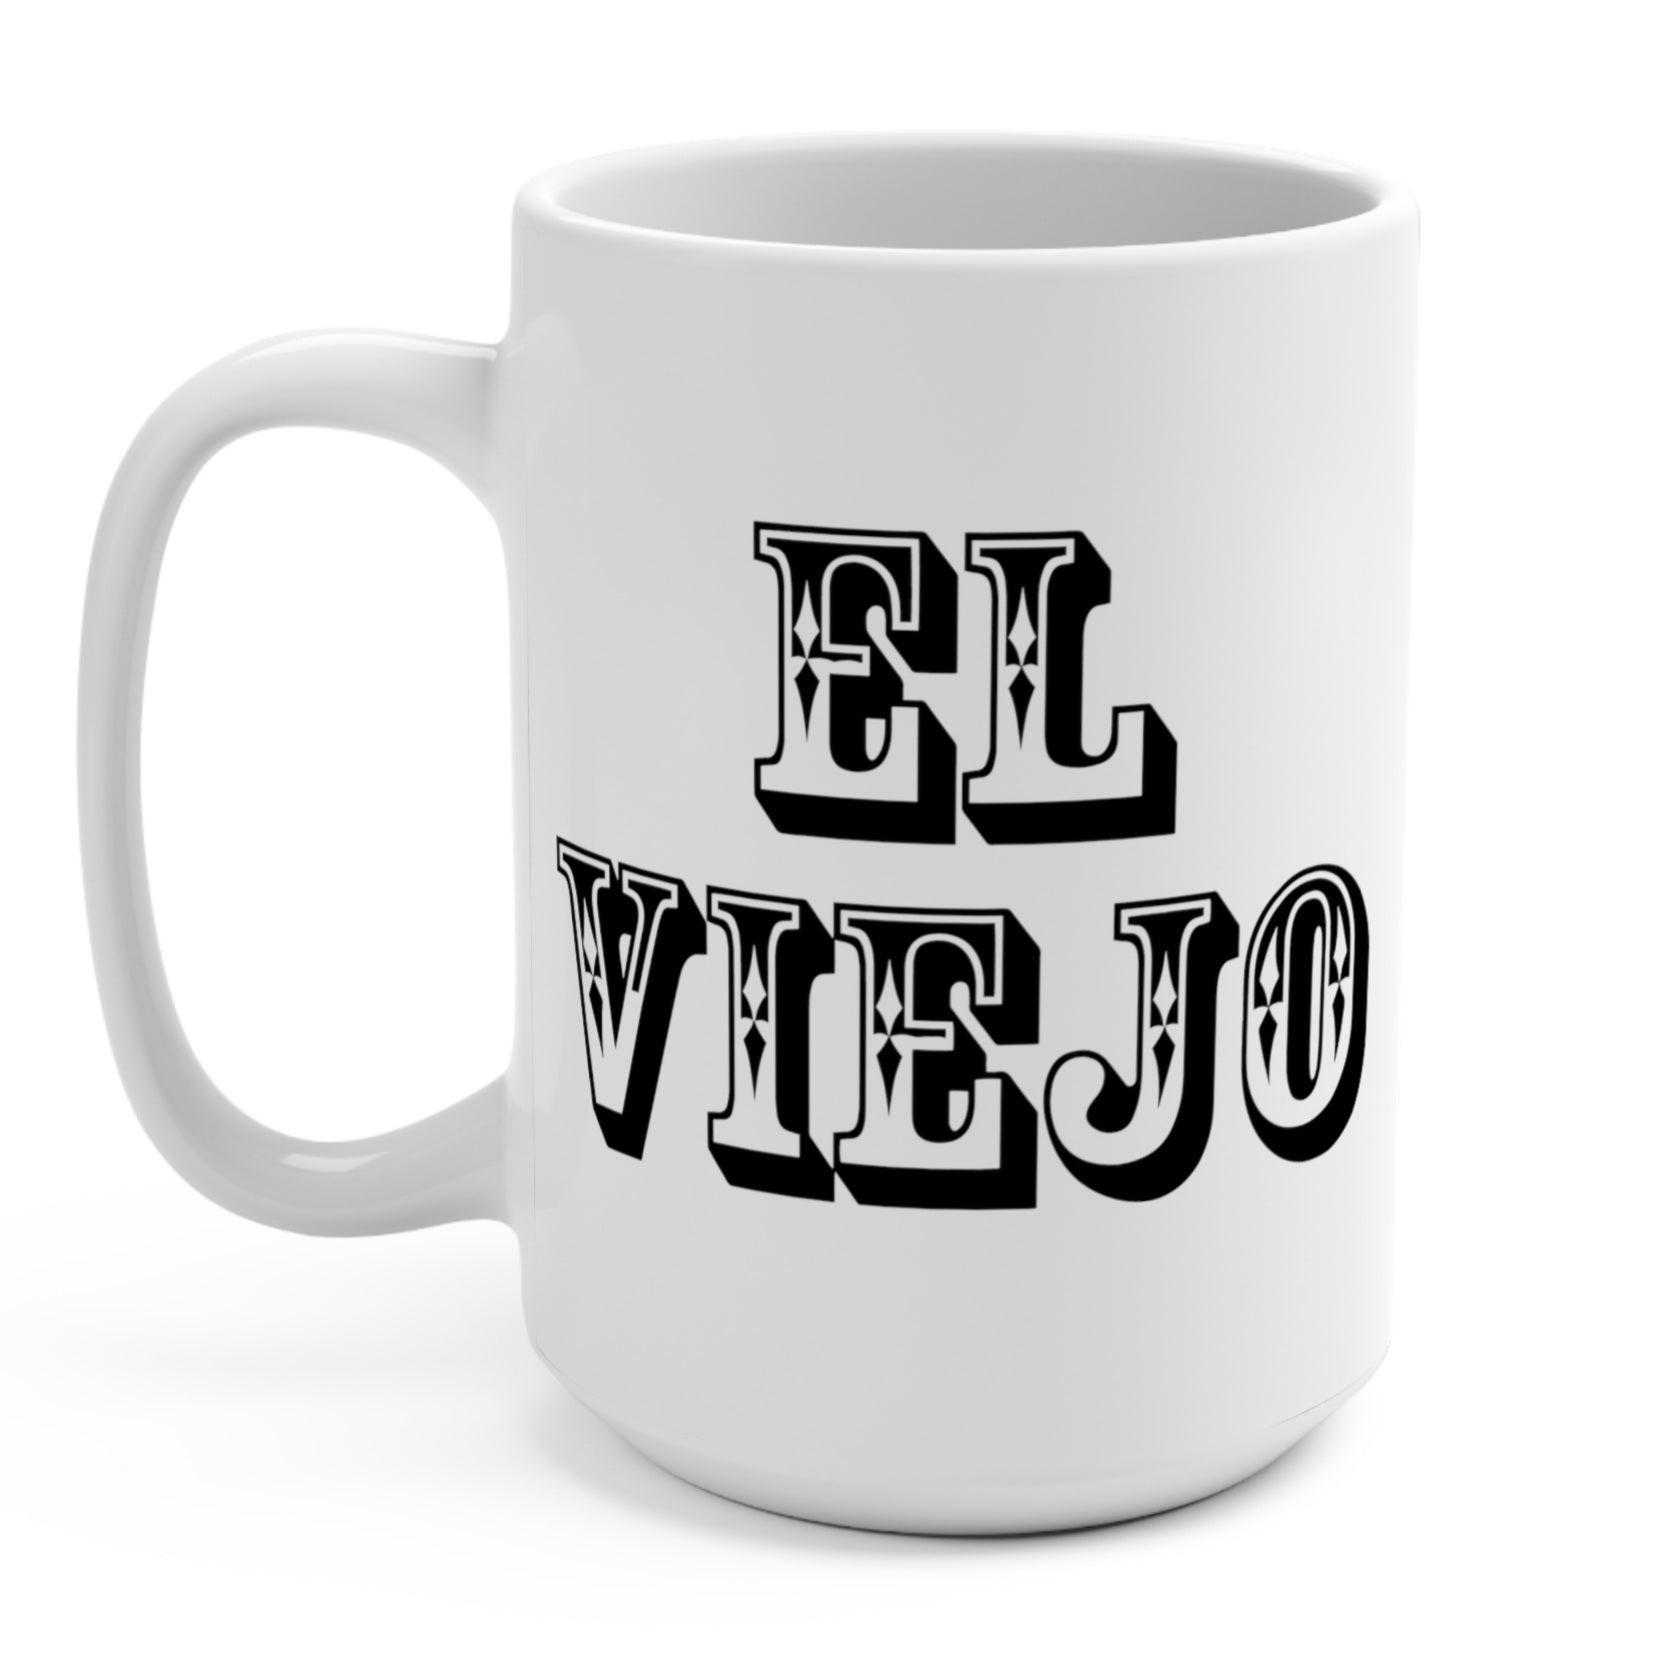 Tall white spanish mug that says EL VIEJO in big Old English letters